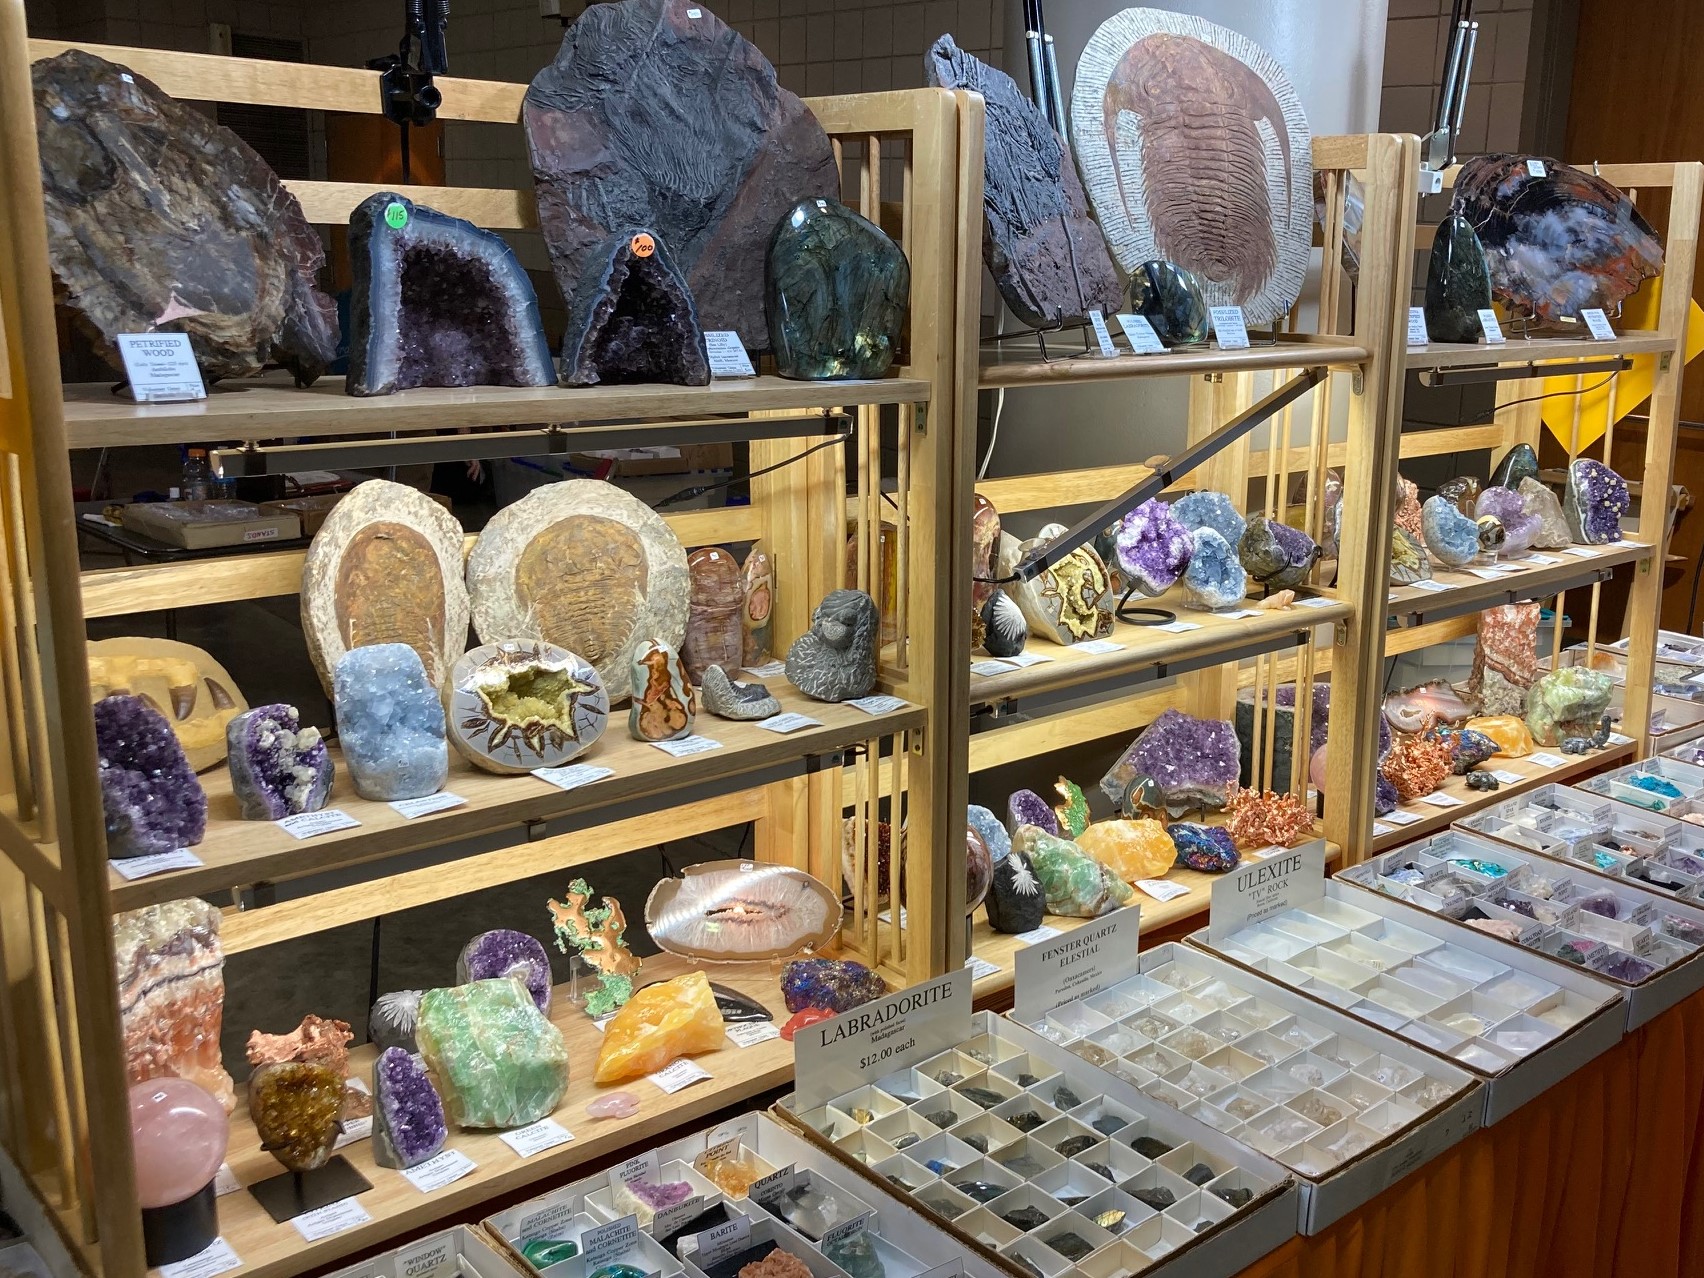 51st Annual Gem Show, hosted by the Alabama Mineral and Lapidary Society